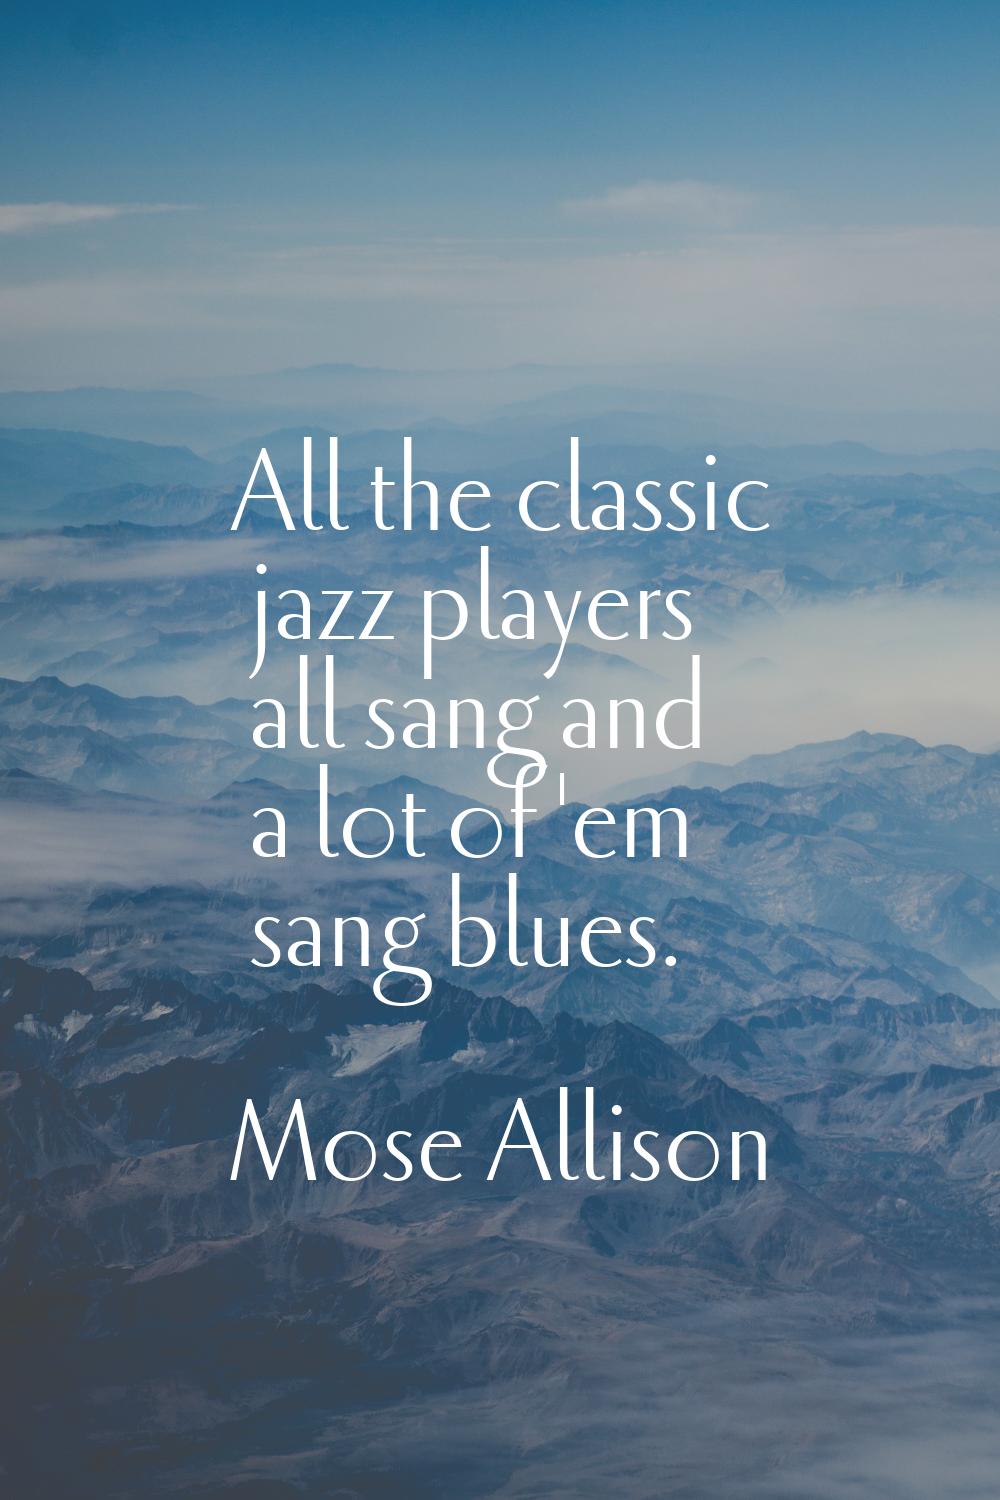 All the classic jazz players all sang and a lot of 'em sang blues.